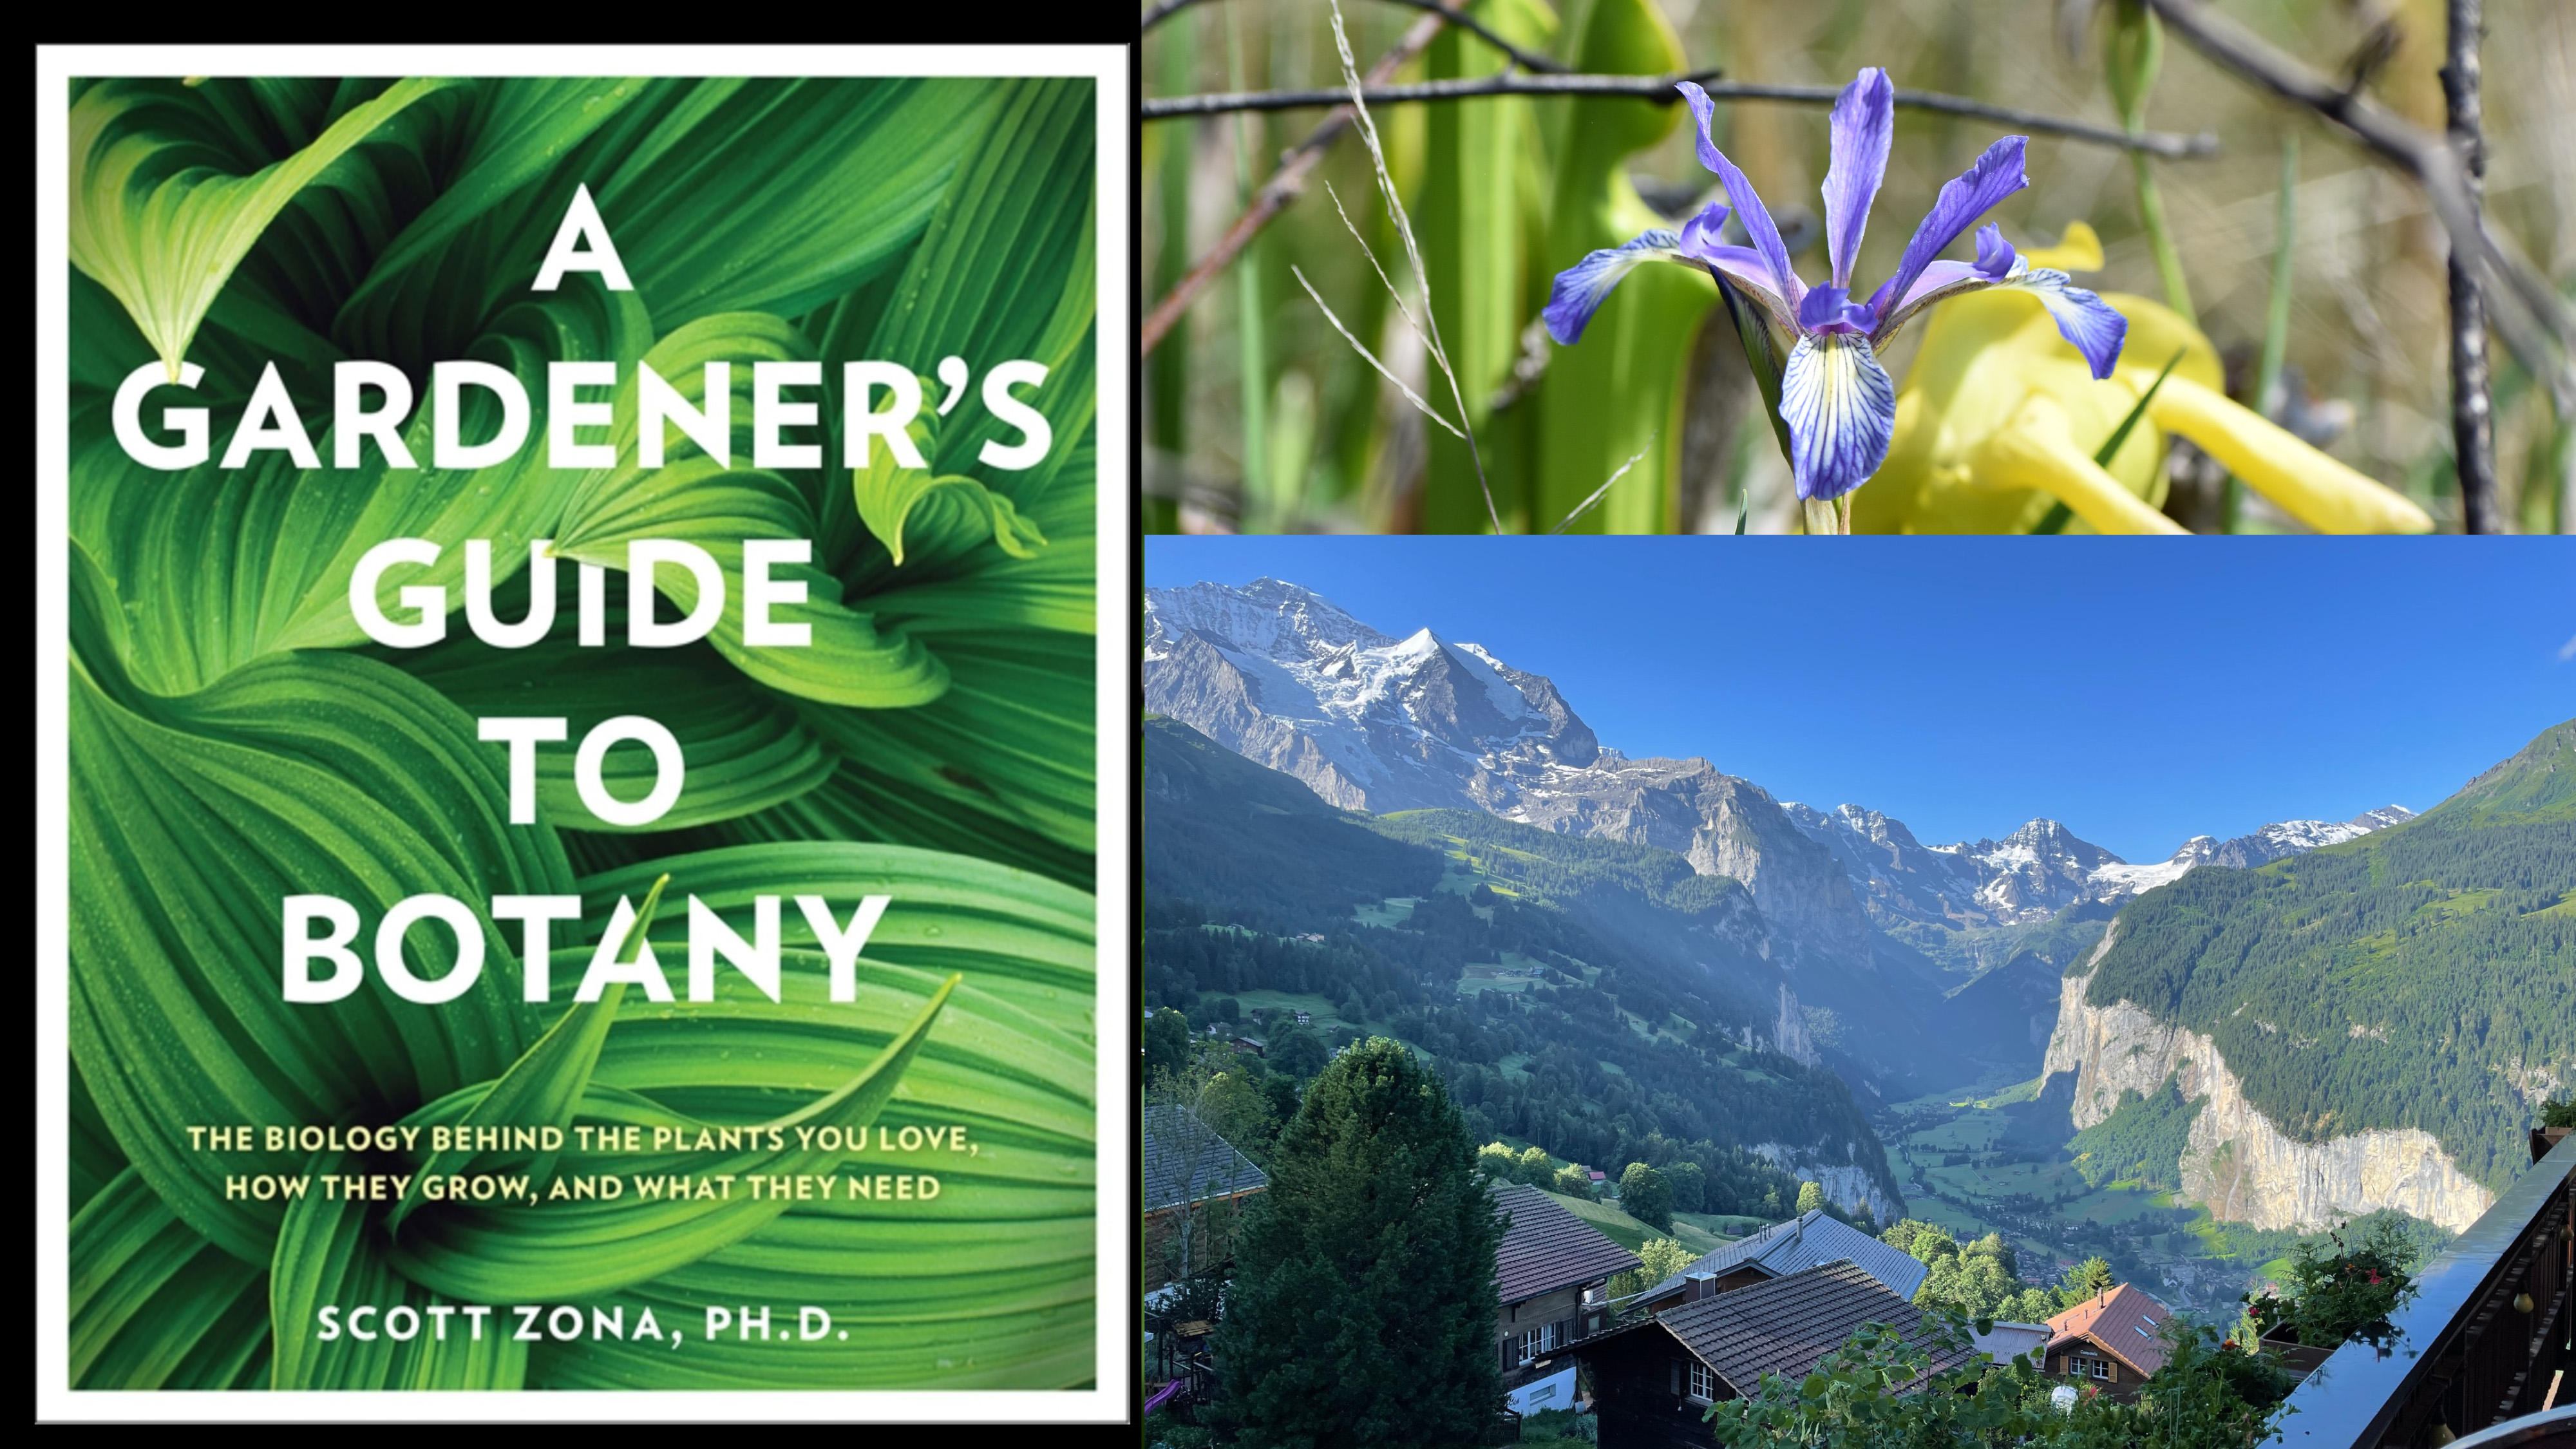 Collage featuring A Gardener's guide to Botany, the swiss alps, and an iris